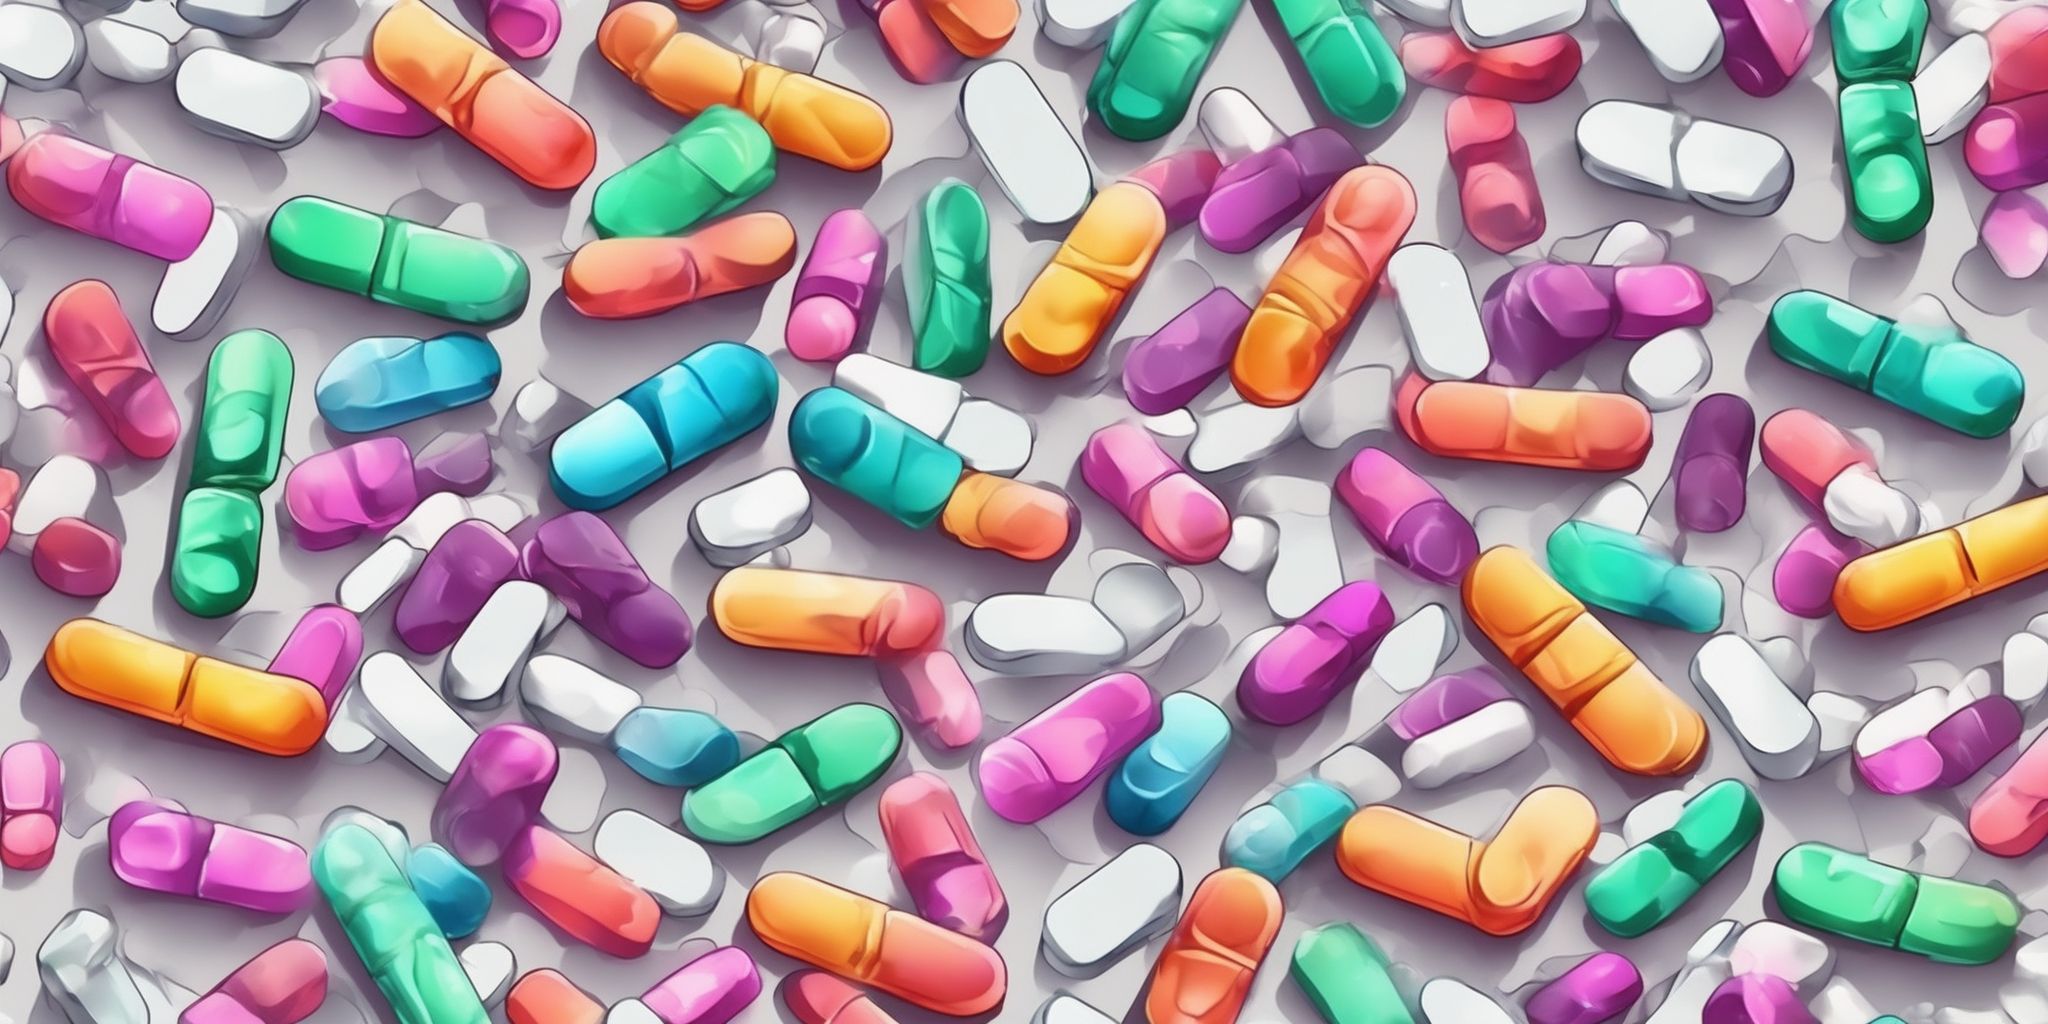 Xanax in illustration style with gradients and white background